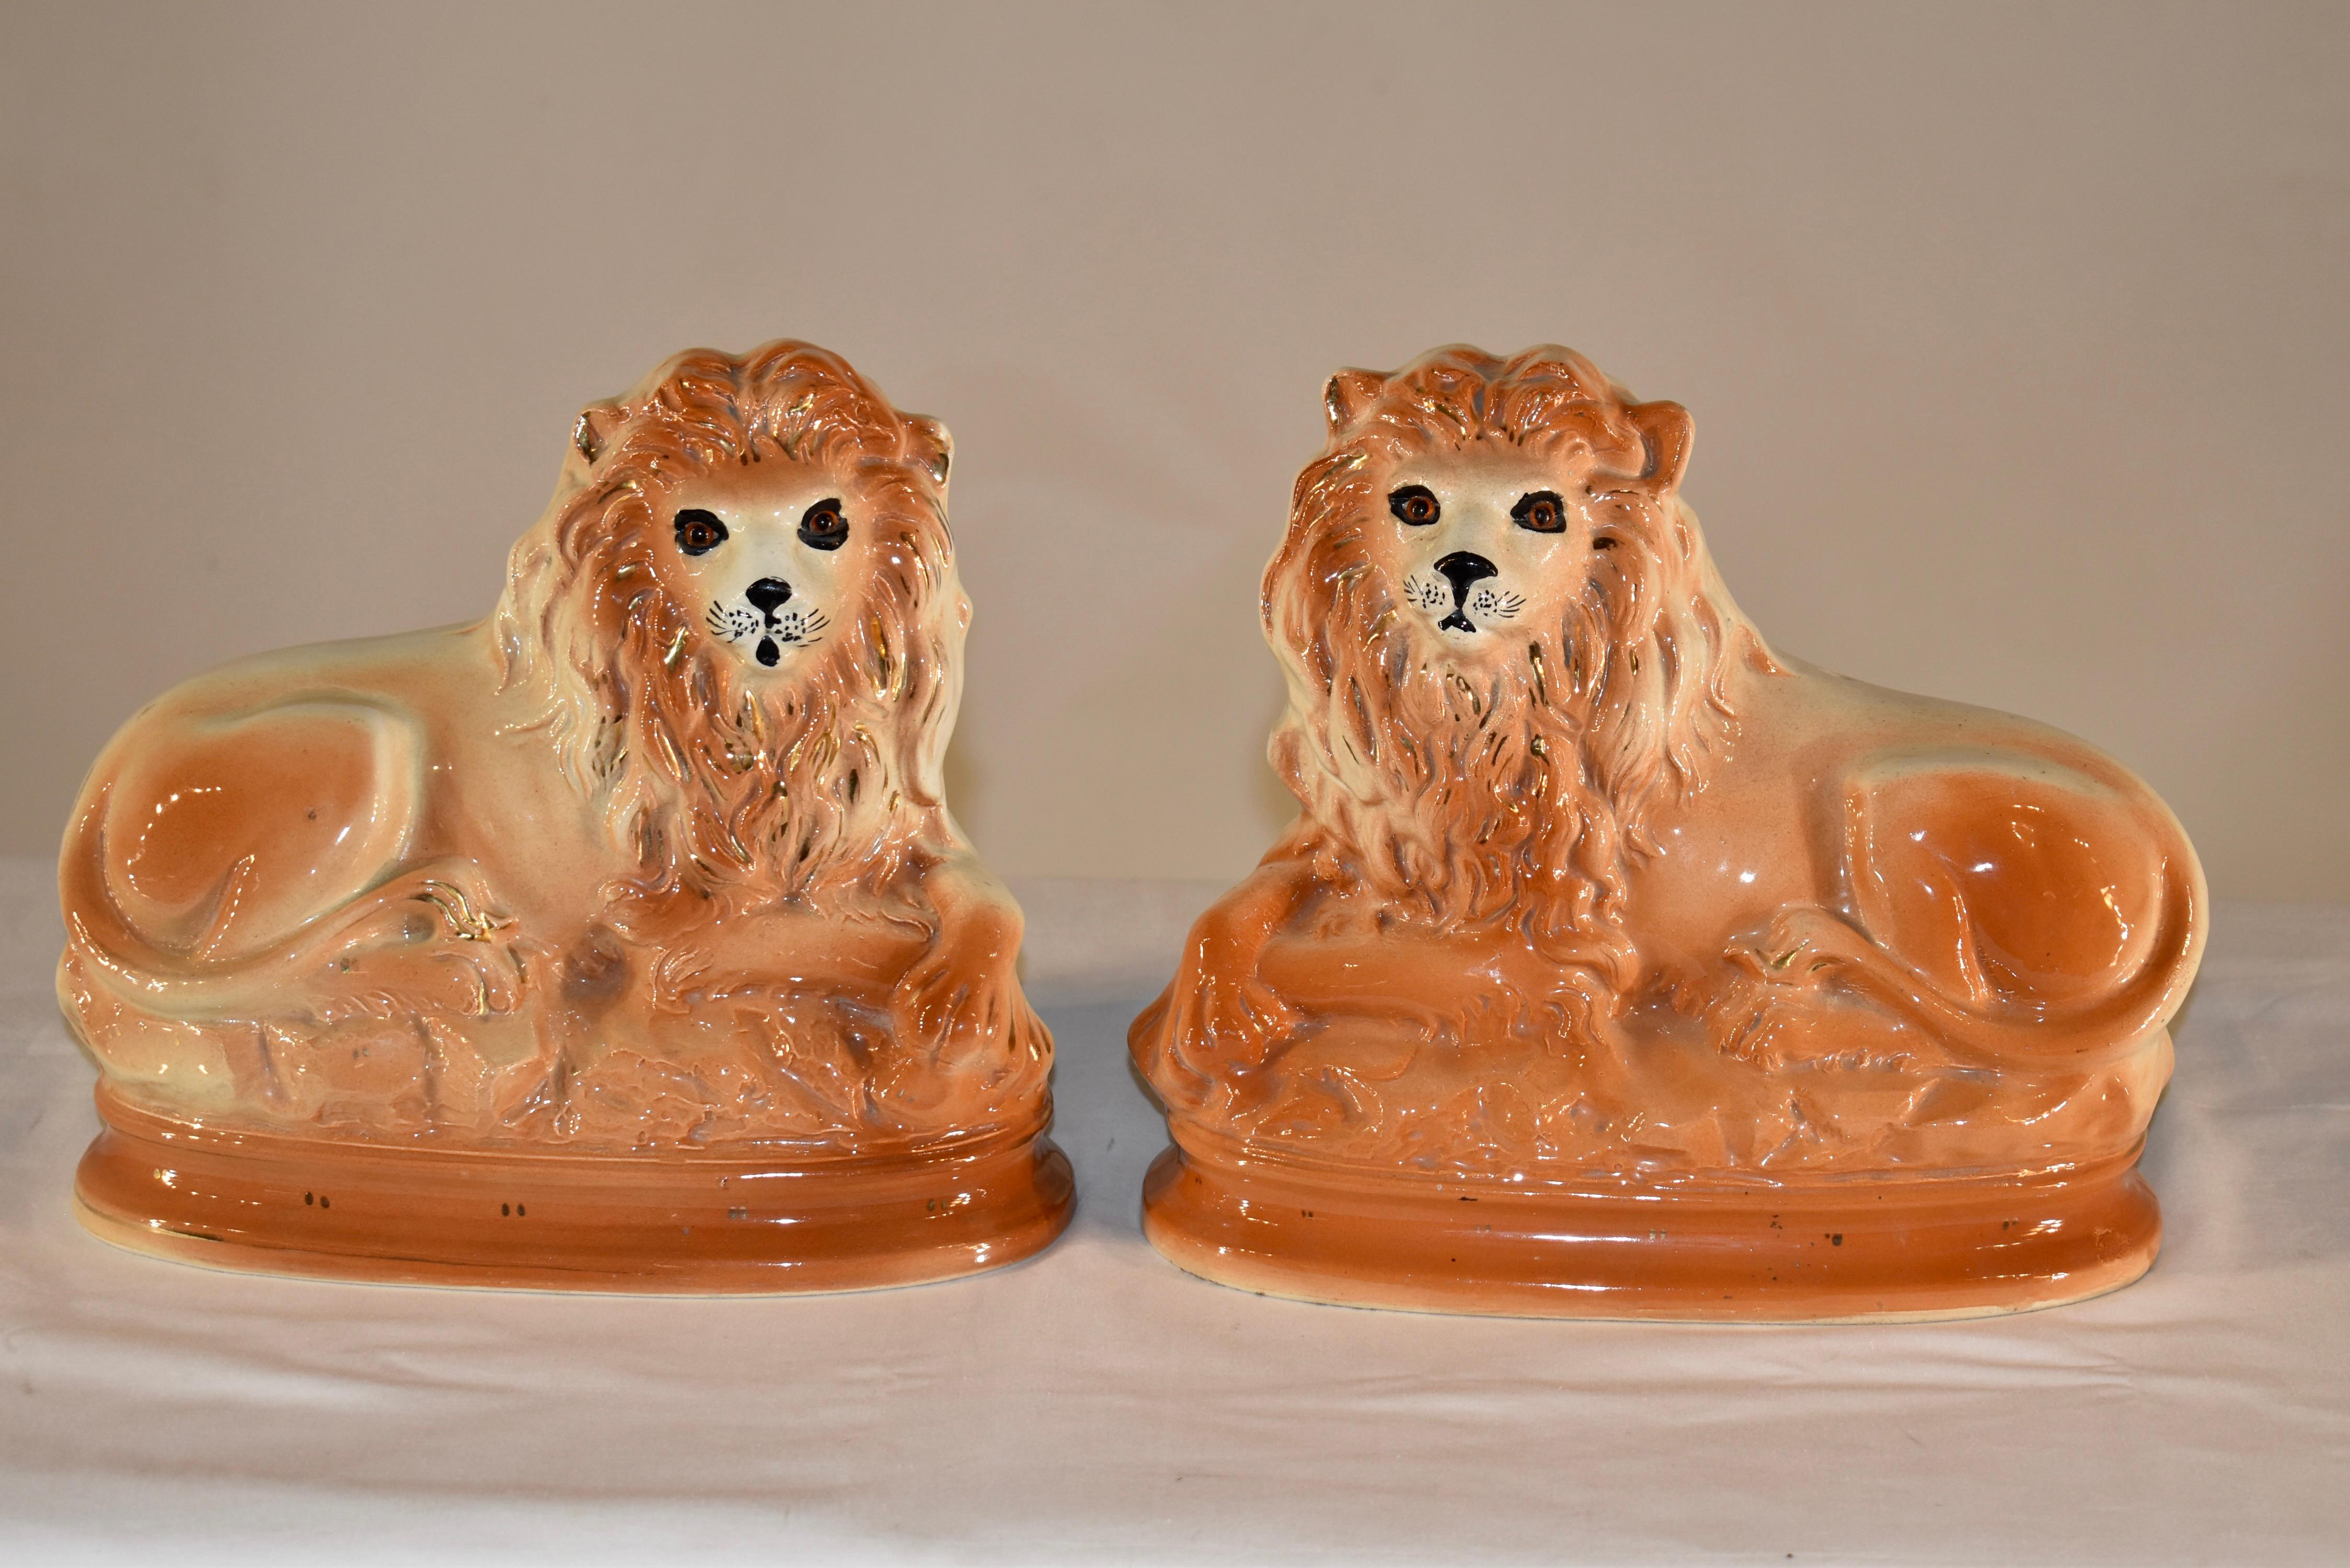 Pair of lovely 19th century ceramic lions made in the Staffordshire region of England.  Their faces are so regal!  They have original glass eyes and wonderful moldings, so their detail is very defined as well.